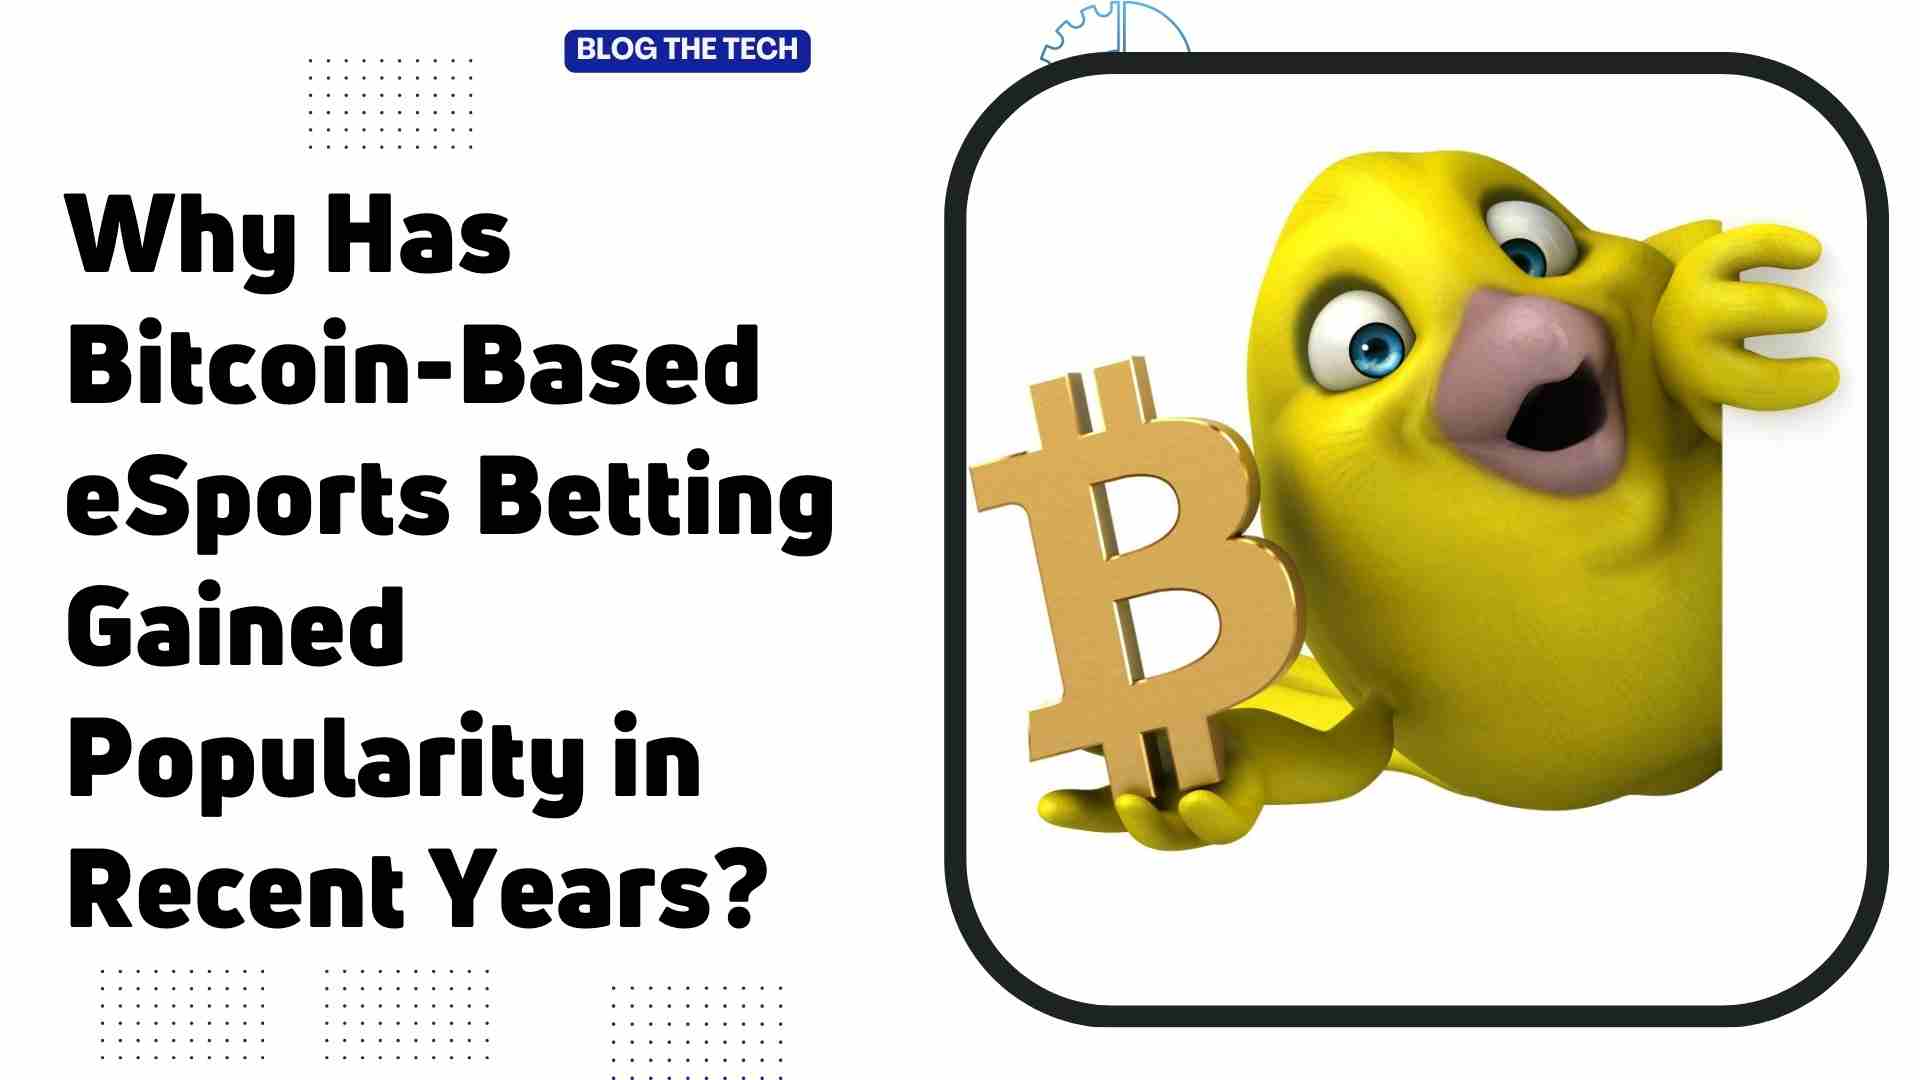 Why Has Bitcoin-Based eSports Betting Gained Popularity in Recent Years?